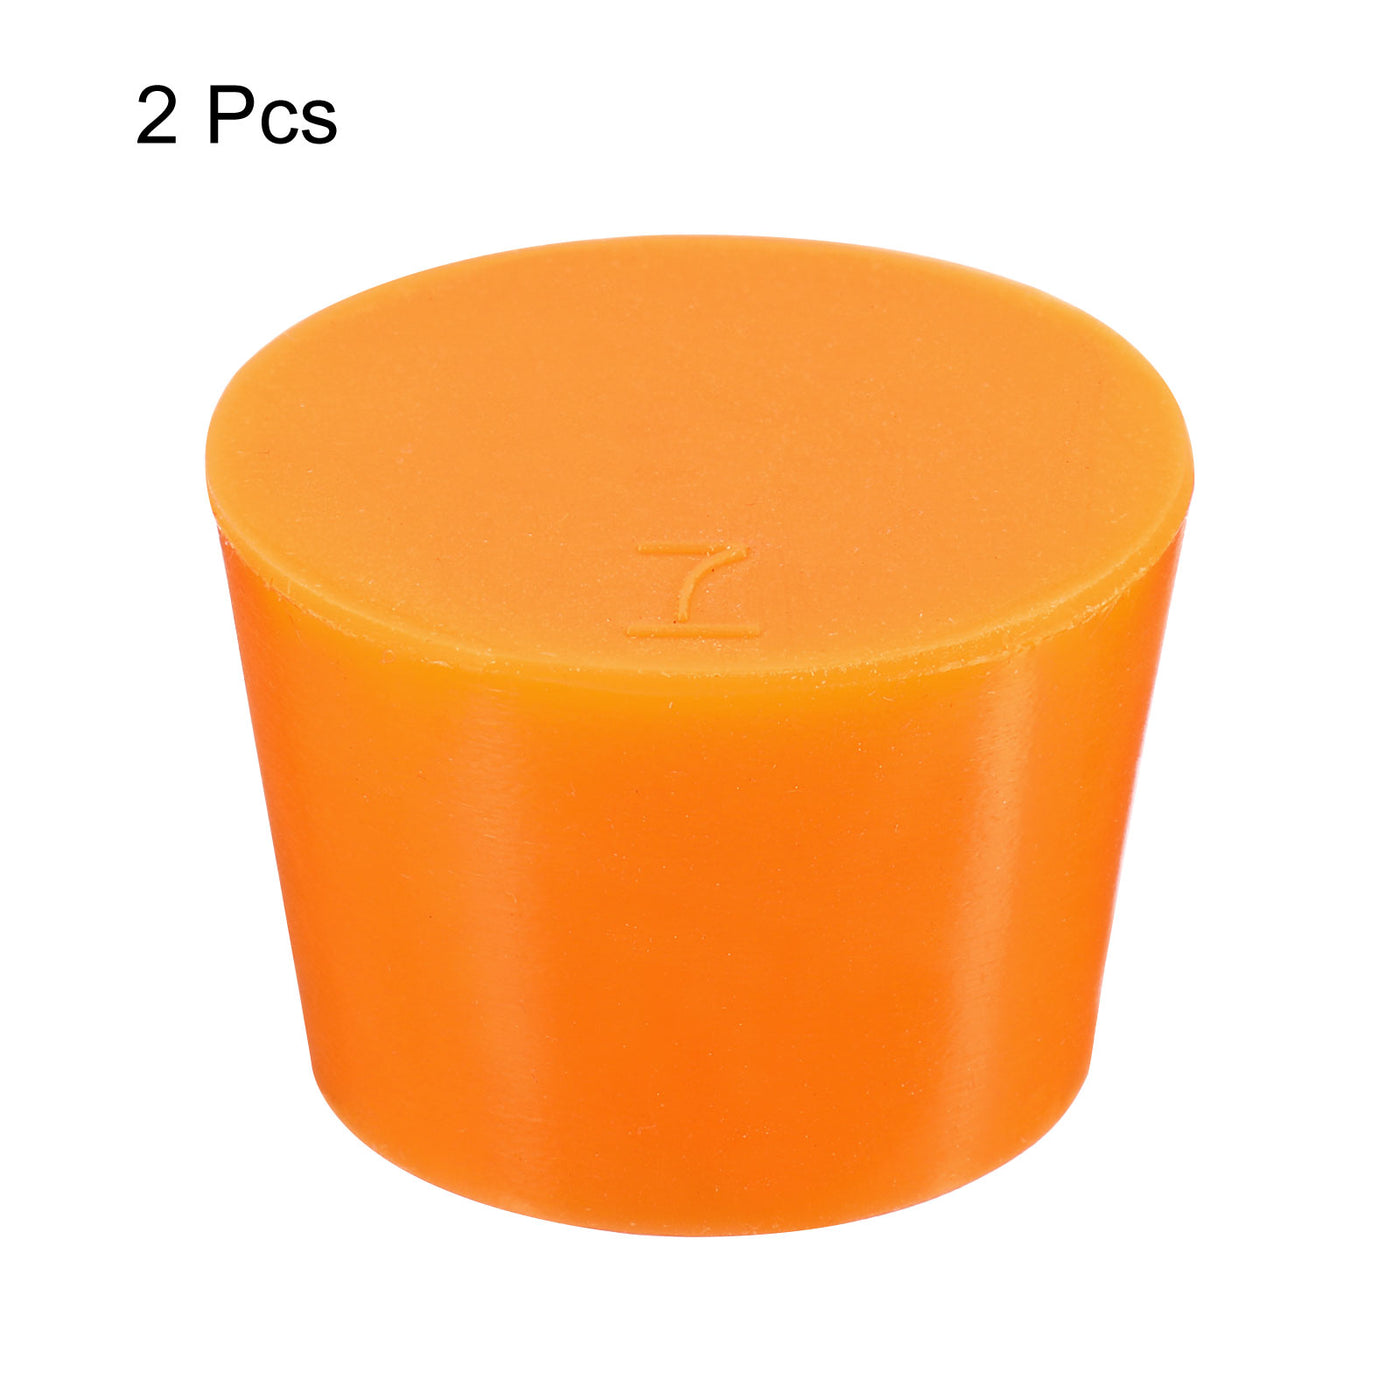 Harfington Silicone Rubber Tapered Plugs Solid for Powder Coating, Painting, Anodizing, Plating, Sandblasting, Laboratory Use